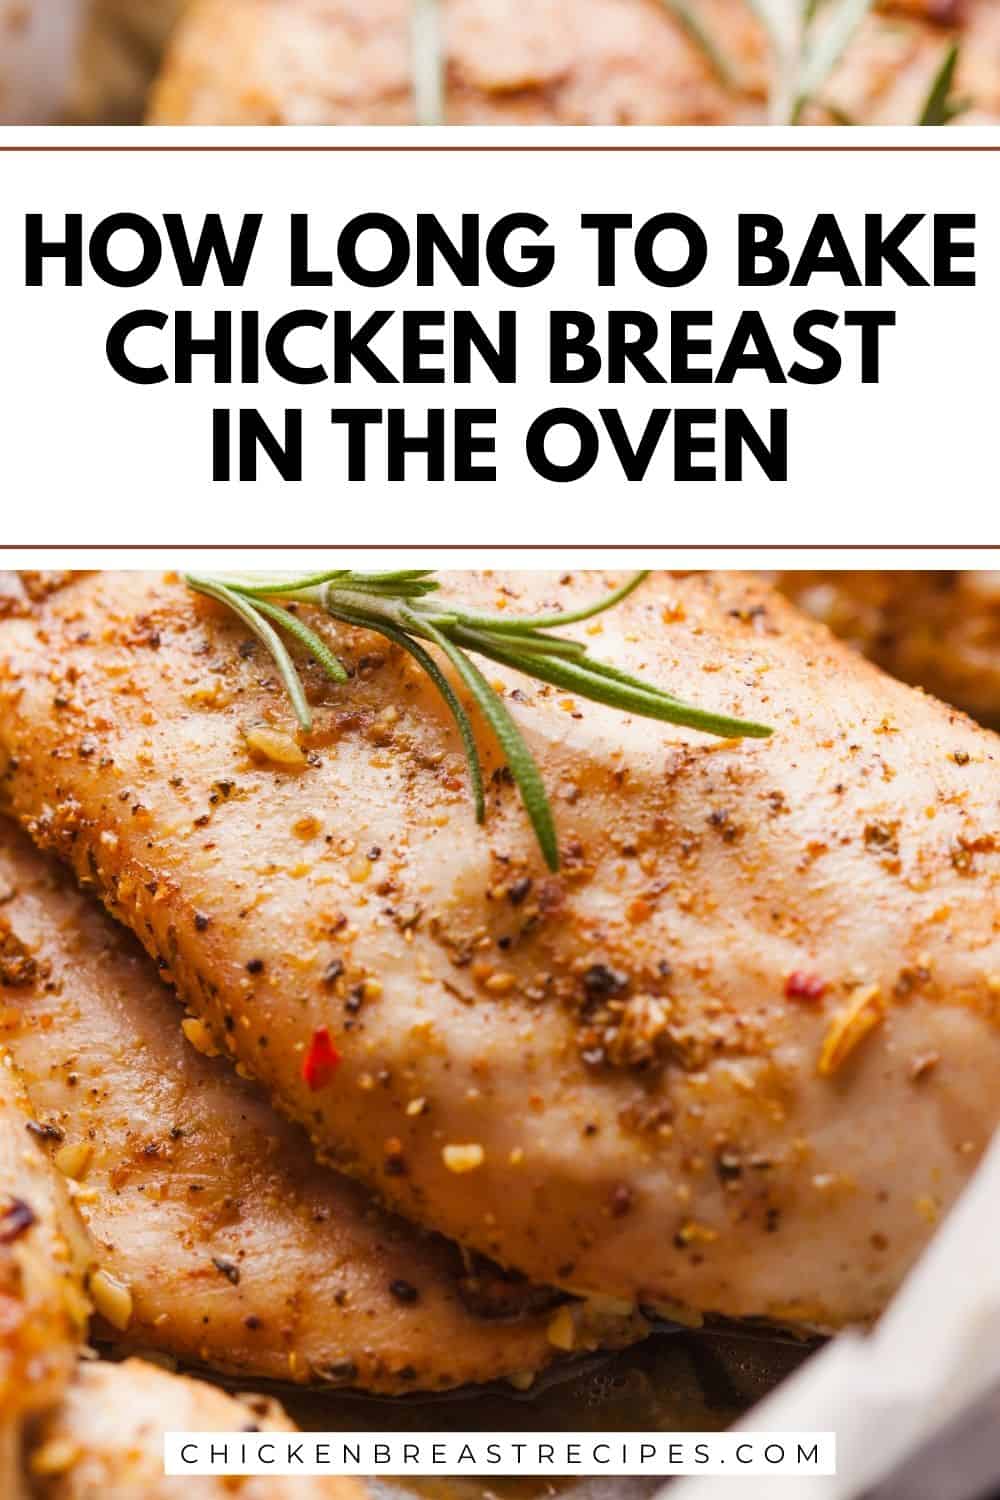 How Long to Bake Chicken Breast in the Oven